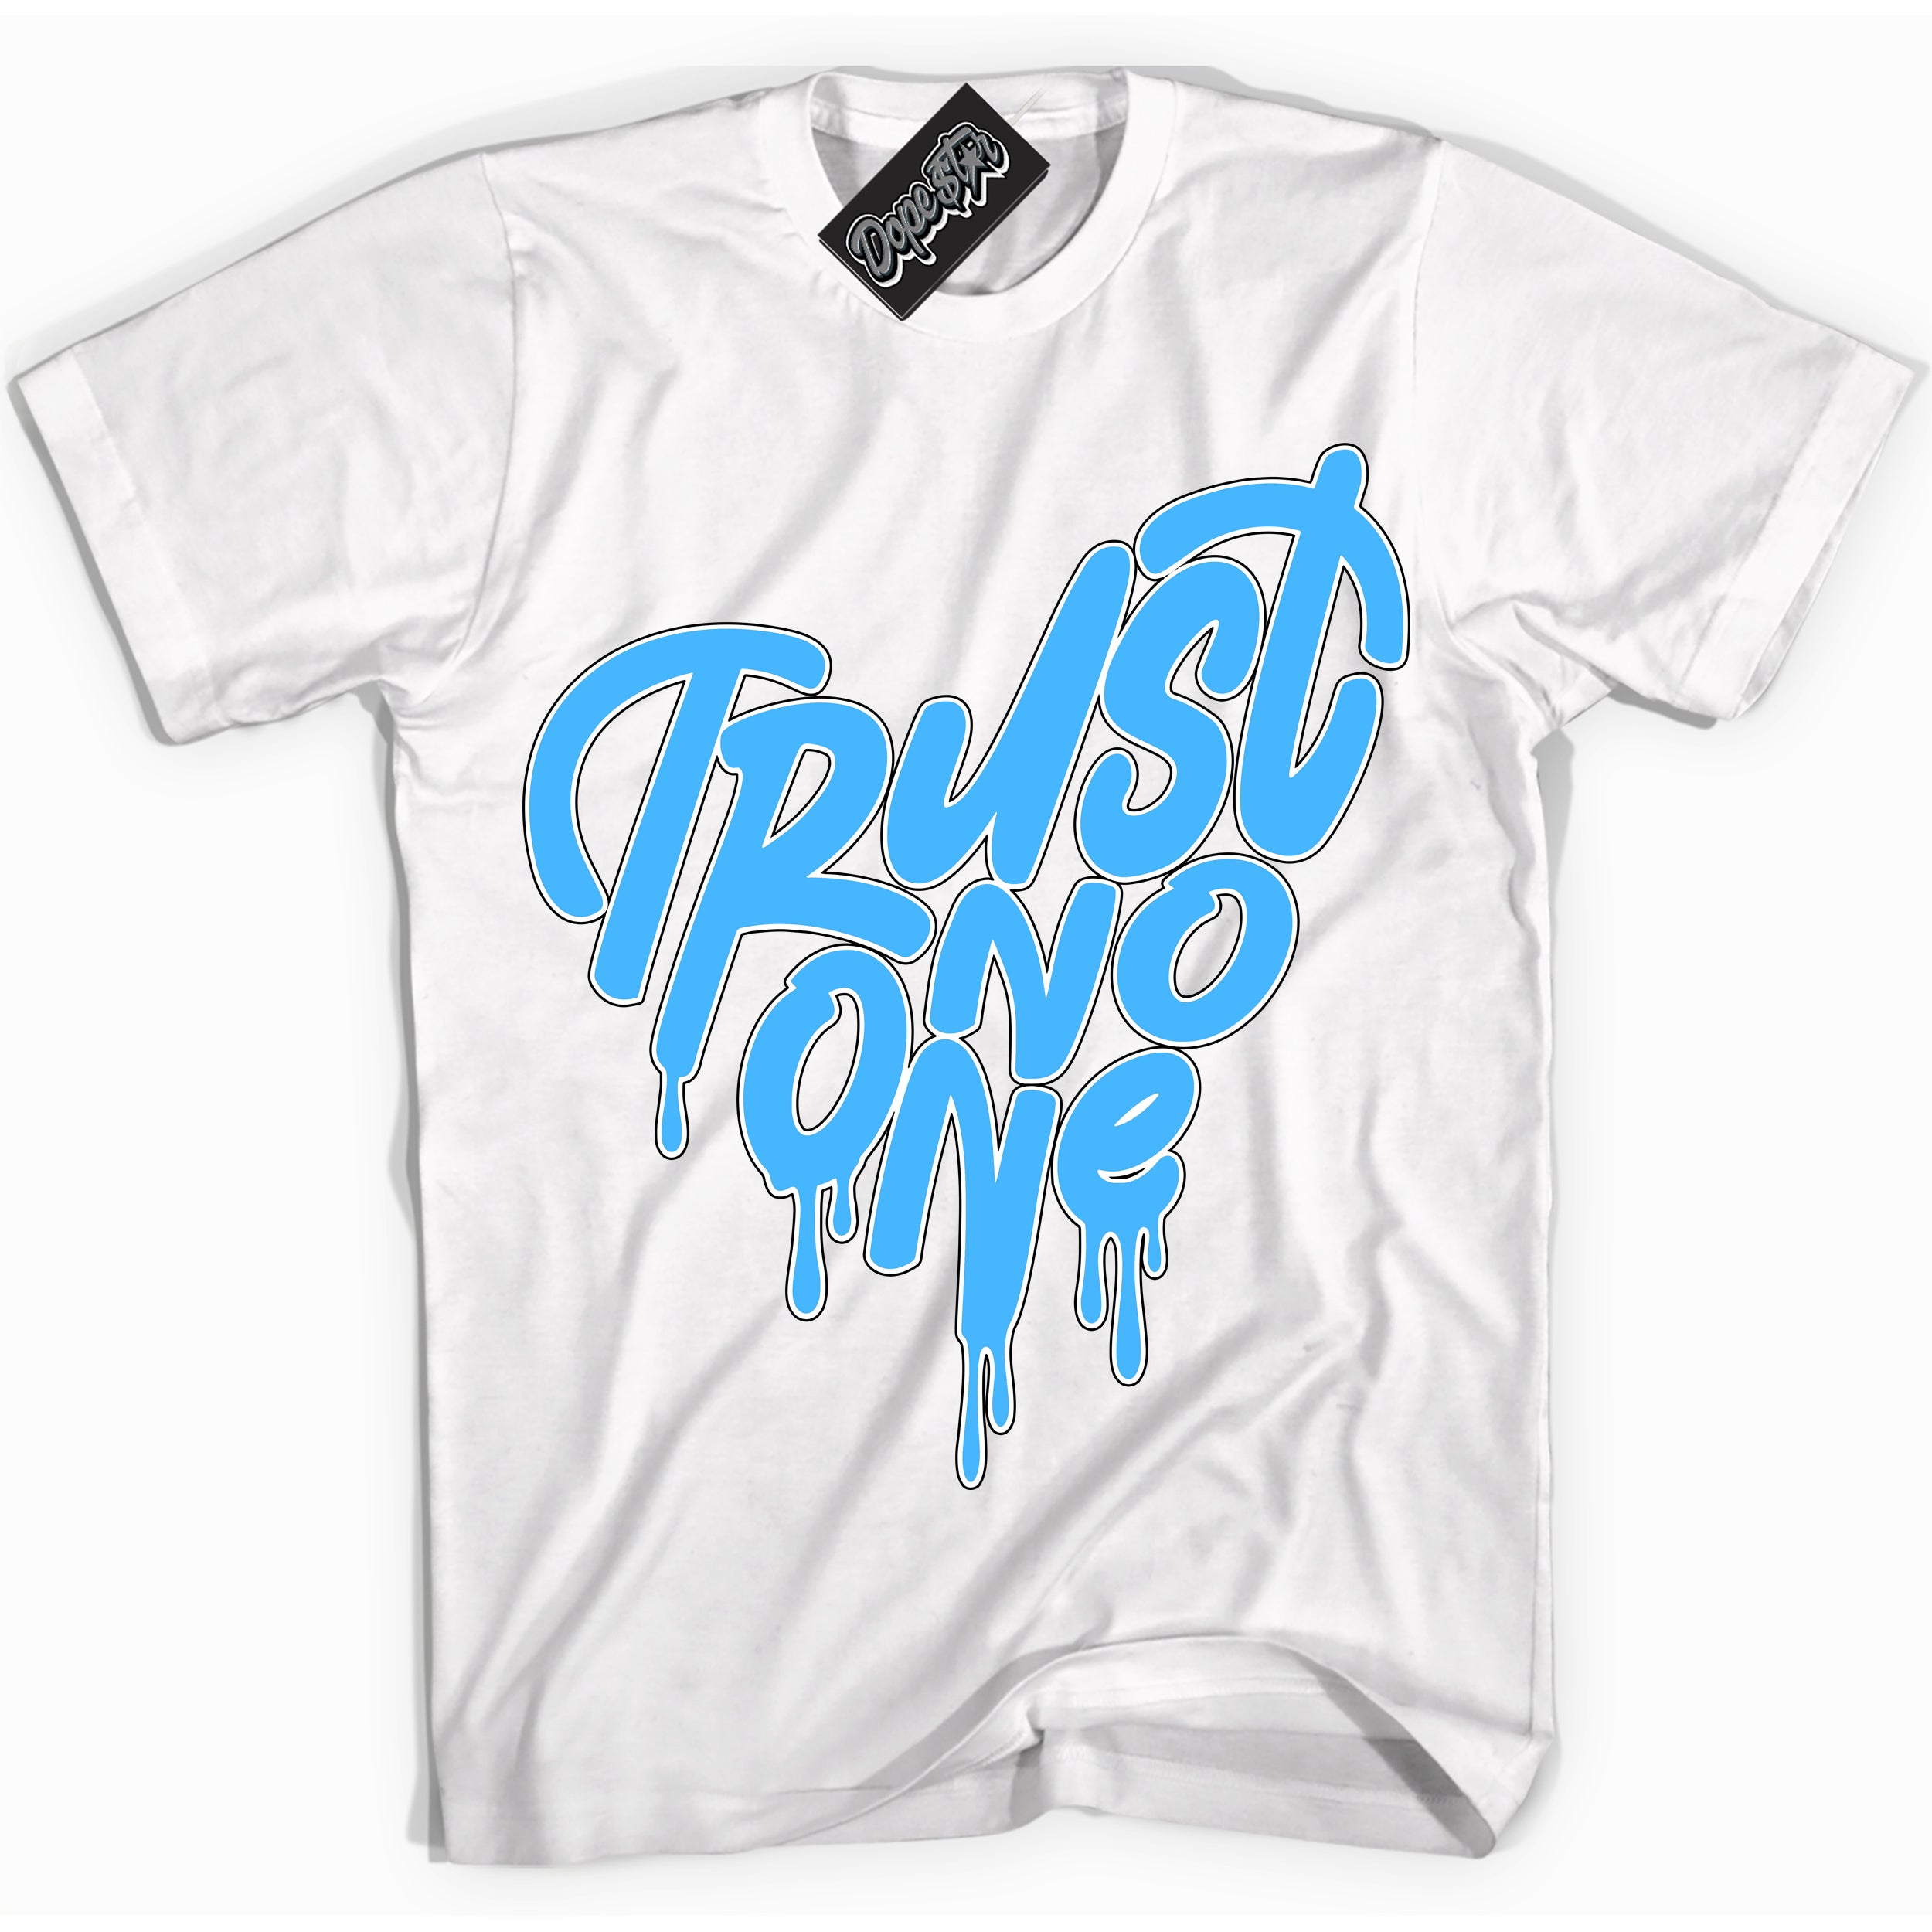 Cool White graphic tee with “ Trust No One Heart ” design, that perfectly matches Powder Blue 9s sneakers 